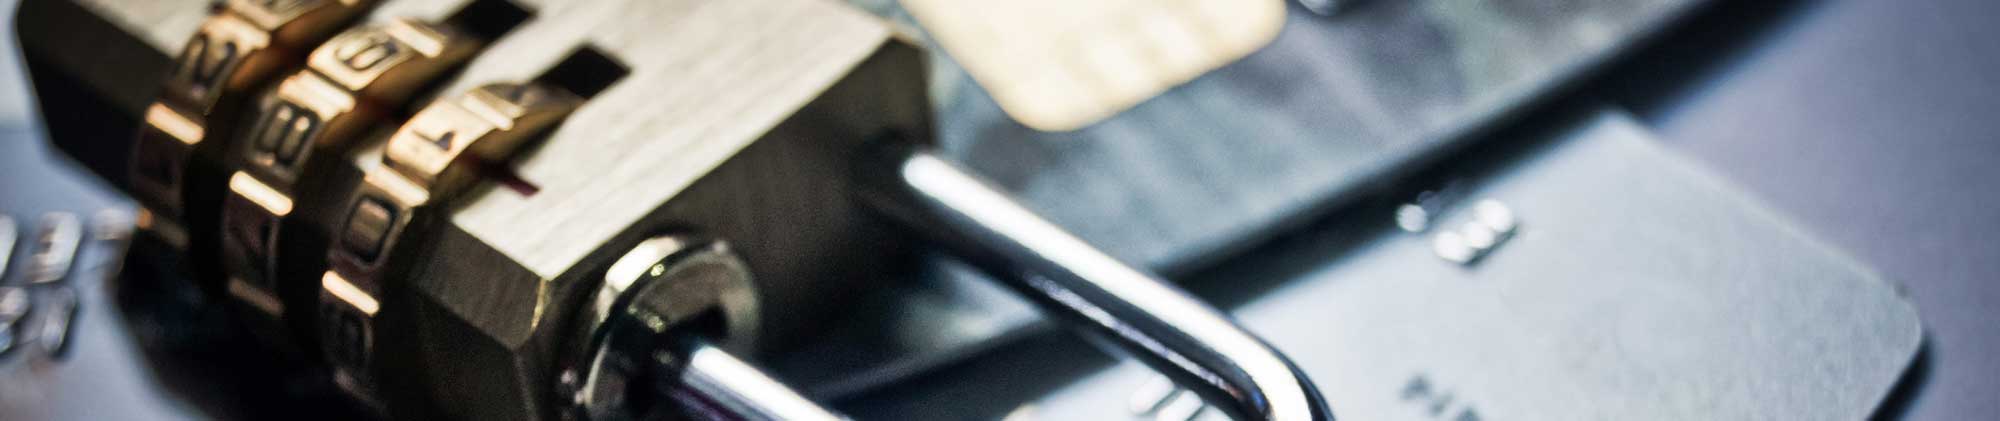 security lock on credit cards representing data encryption to prevent data theft